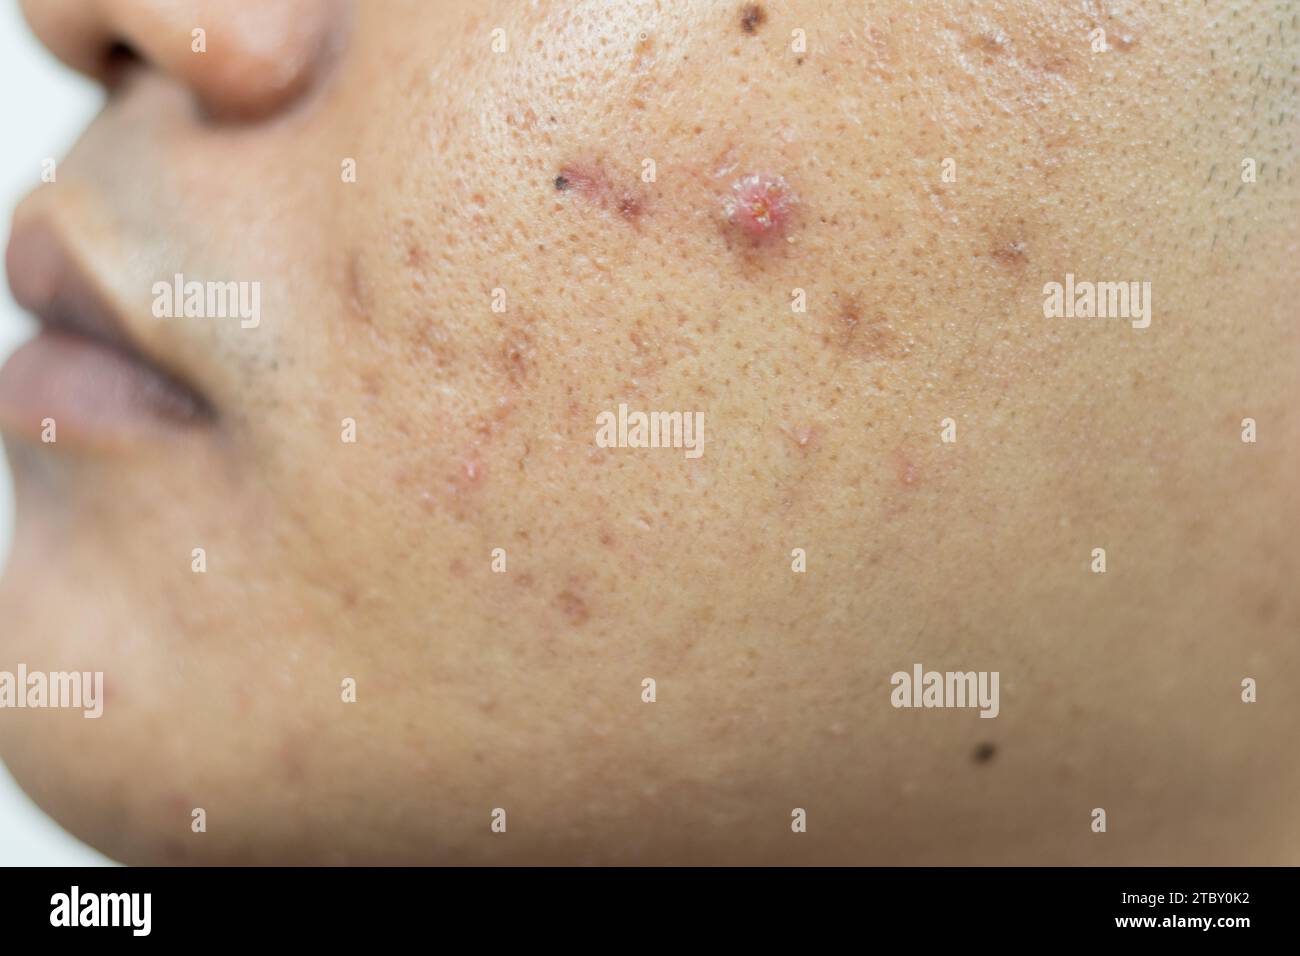 skin problems. problem of inflamed acne on the face. Inflamed acne consists of swelling, redness, and pores that are severely clogged with bacteria, o Stock Photo